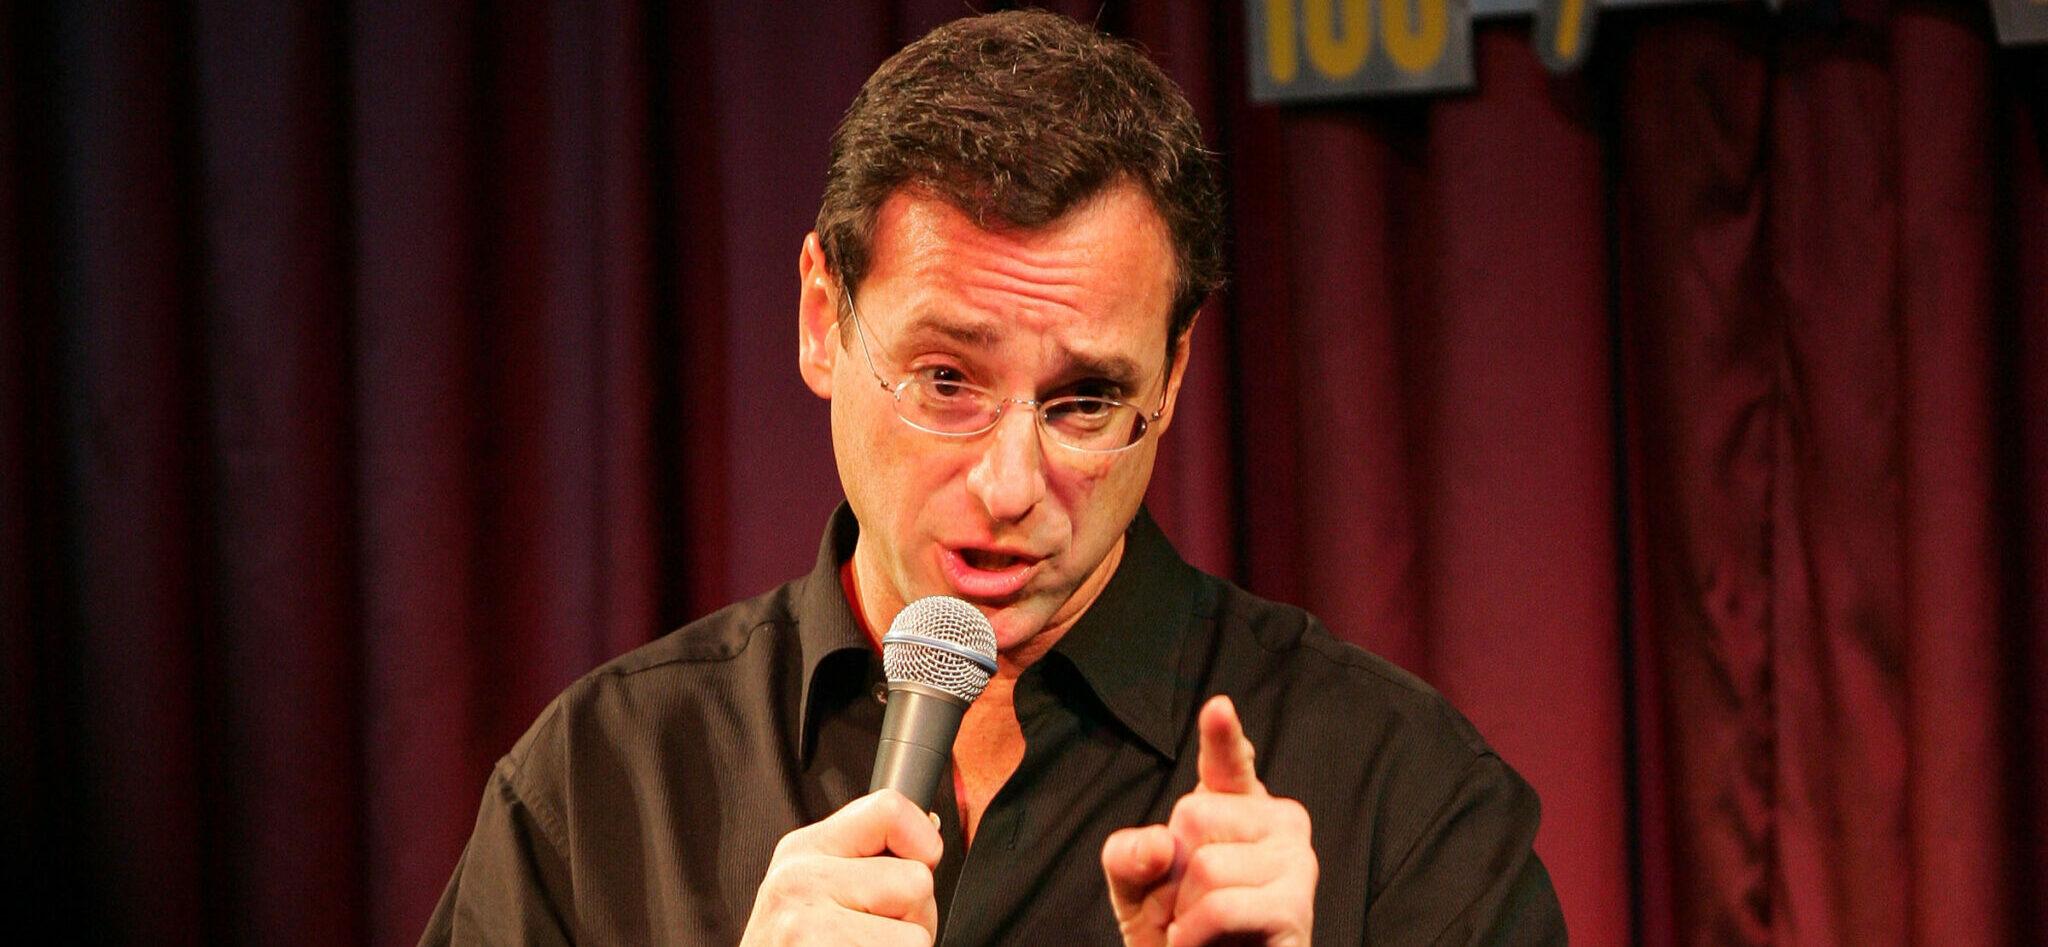 Police Report: Hotel Staff Reported Bob Saget Was 'Cold To The Touch'